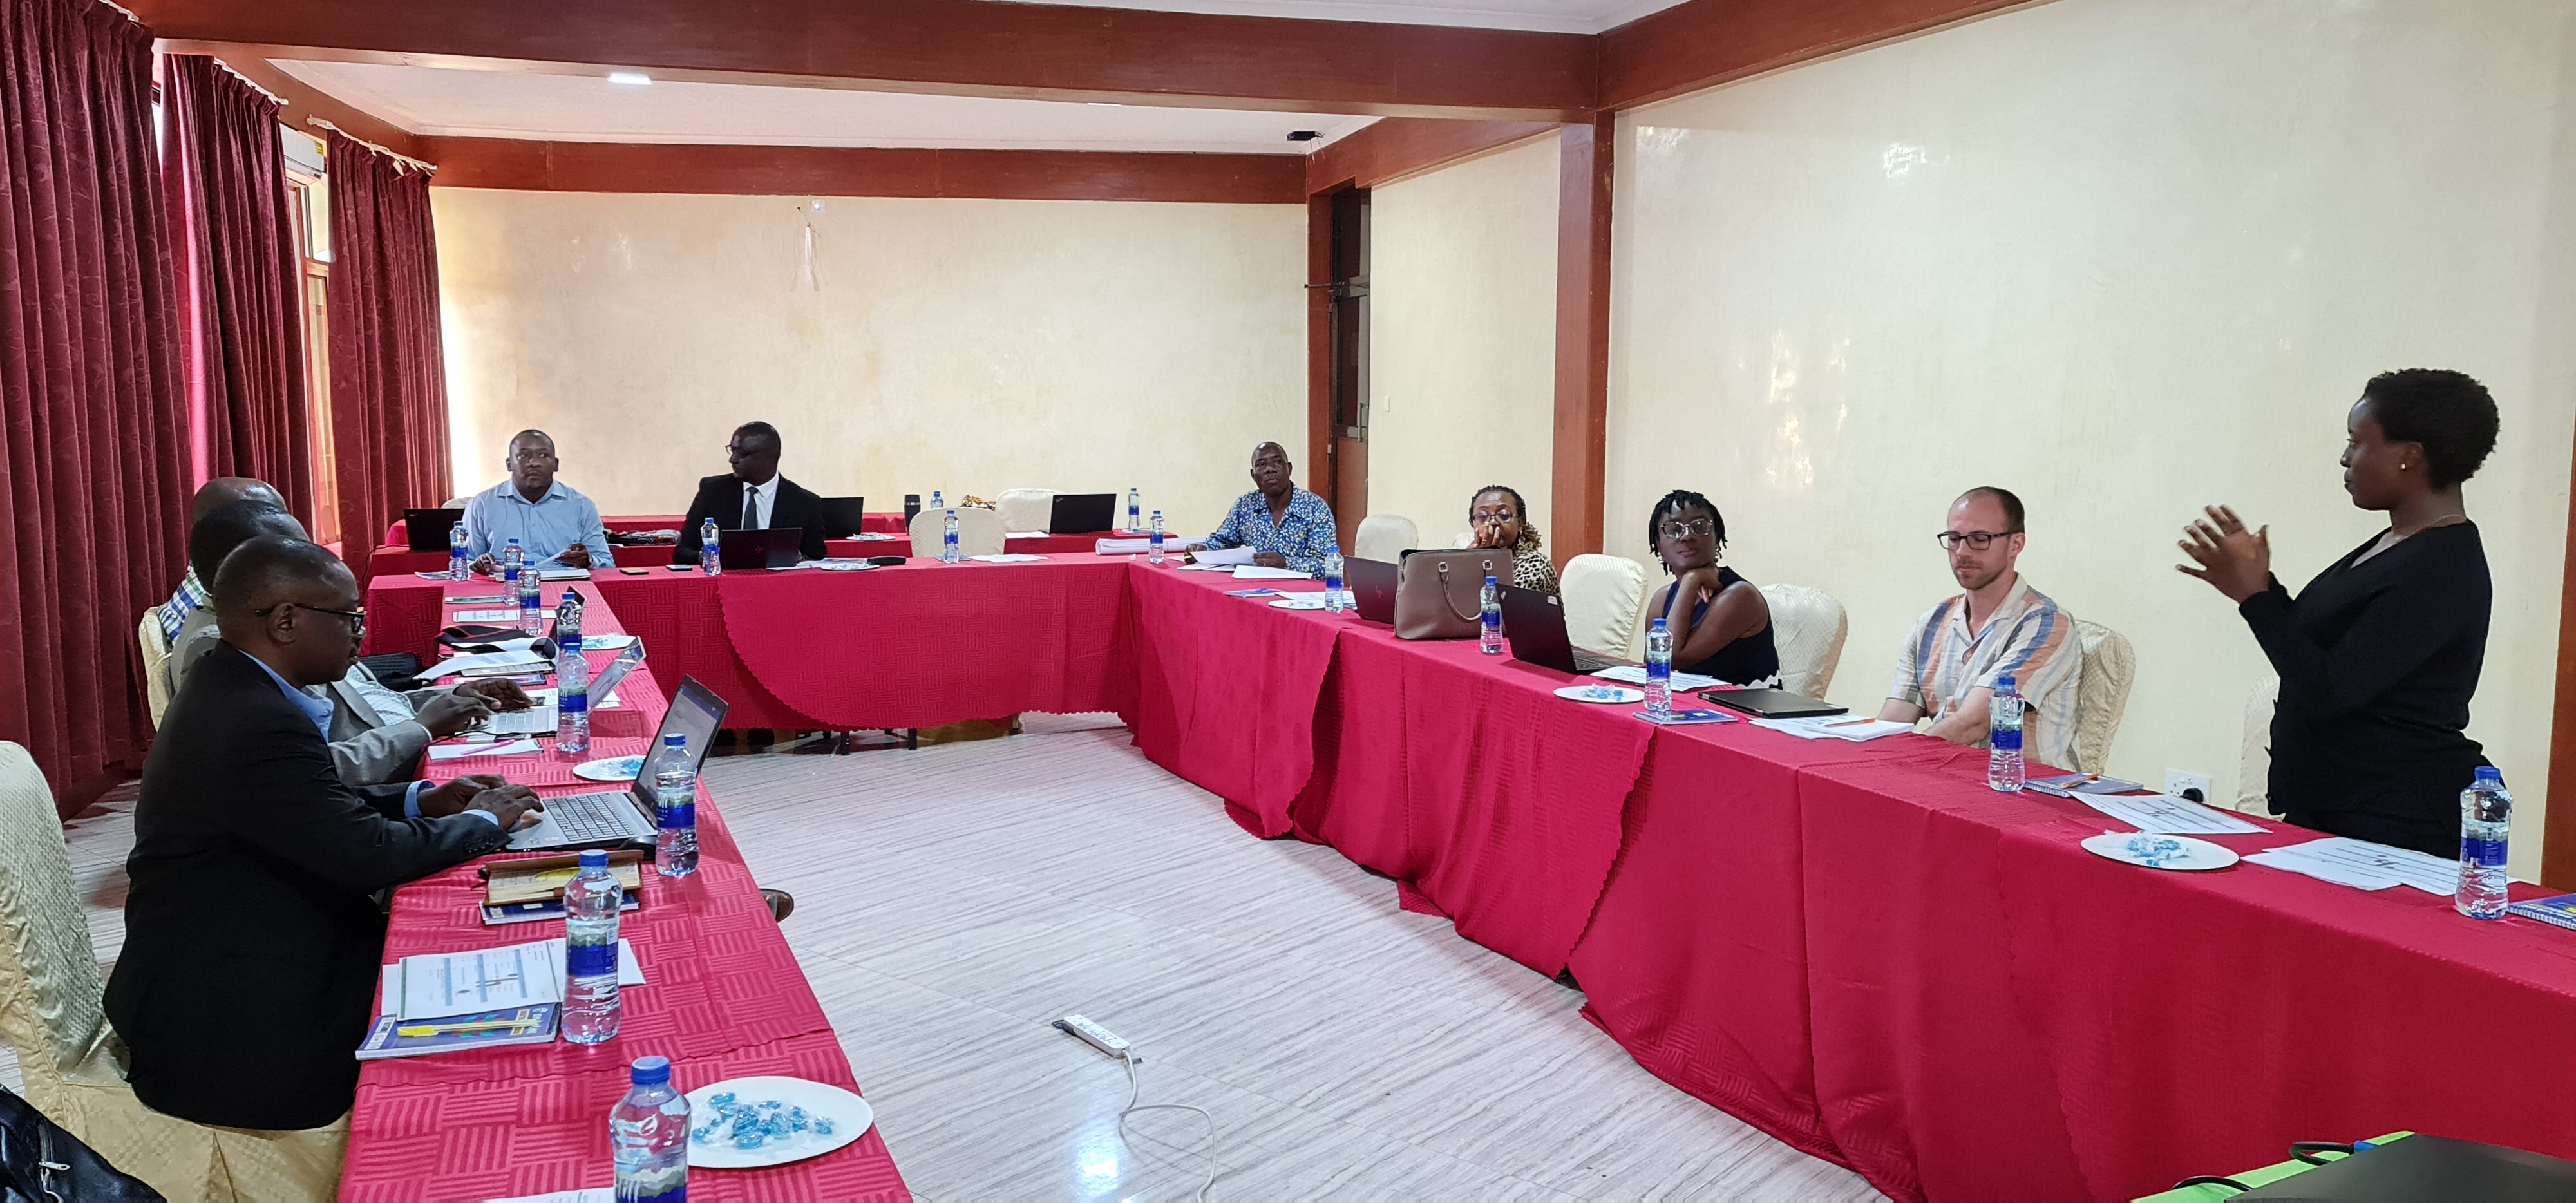 DISSEMINATION: Ifakara, stakeholders discuss project findings in Dodoma